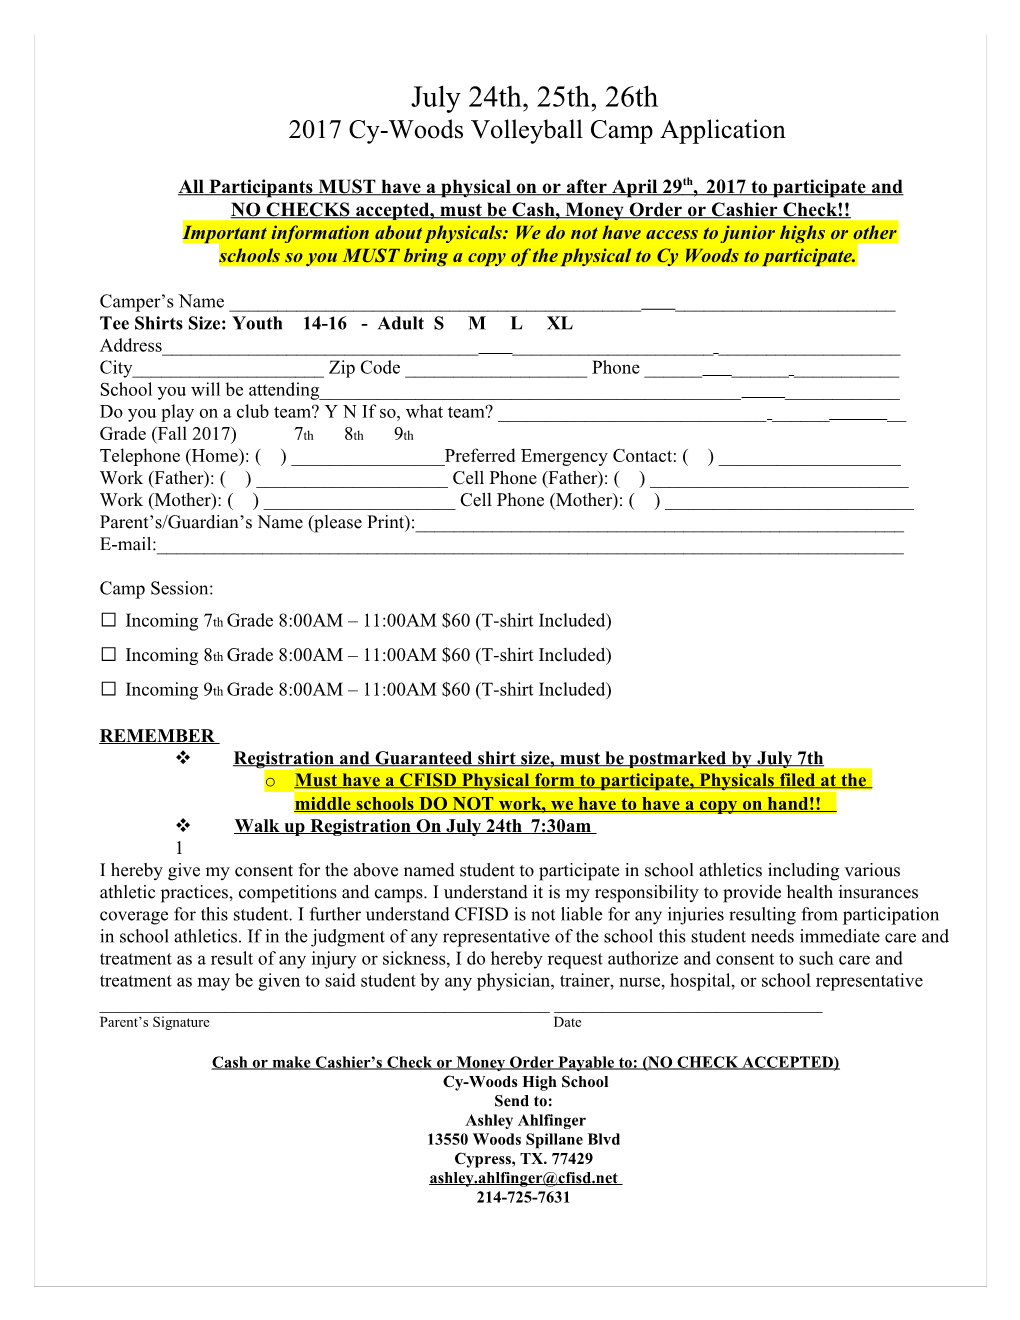 2017 Cy-Woods Volleyball Camp Application